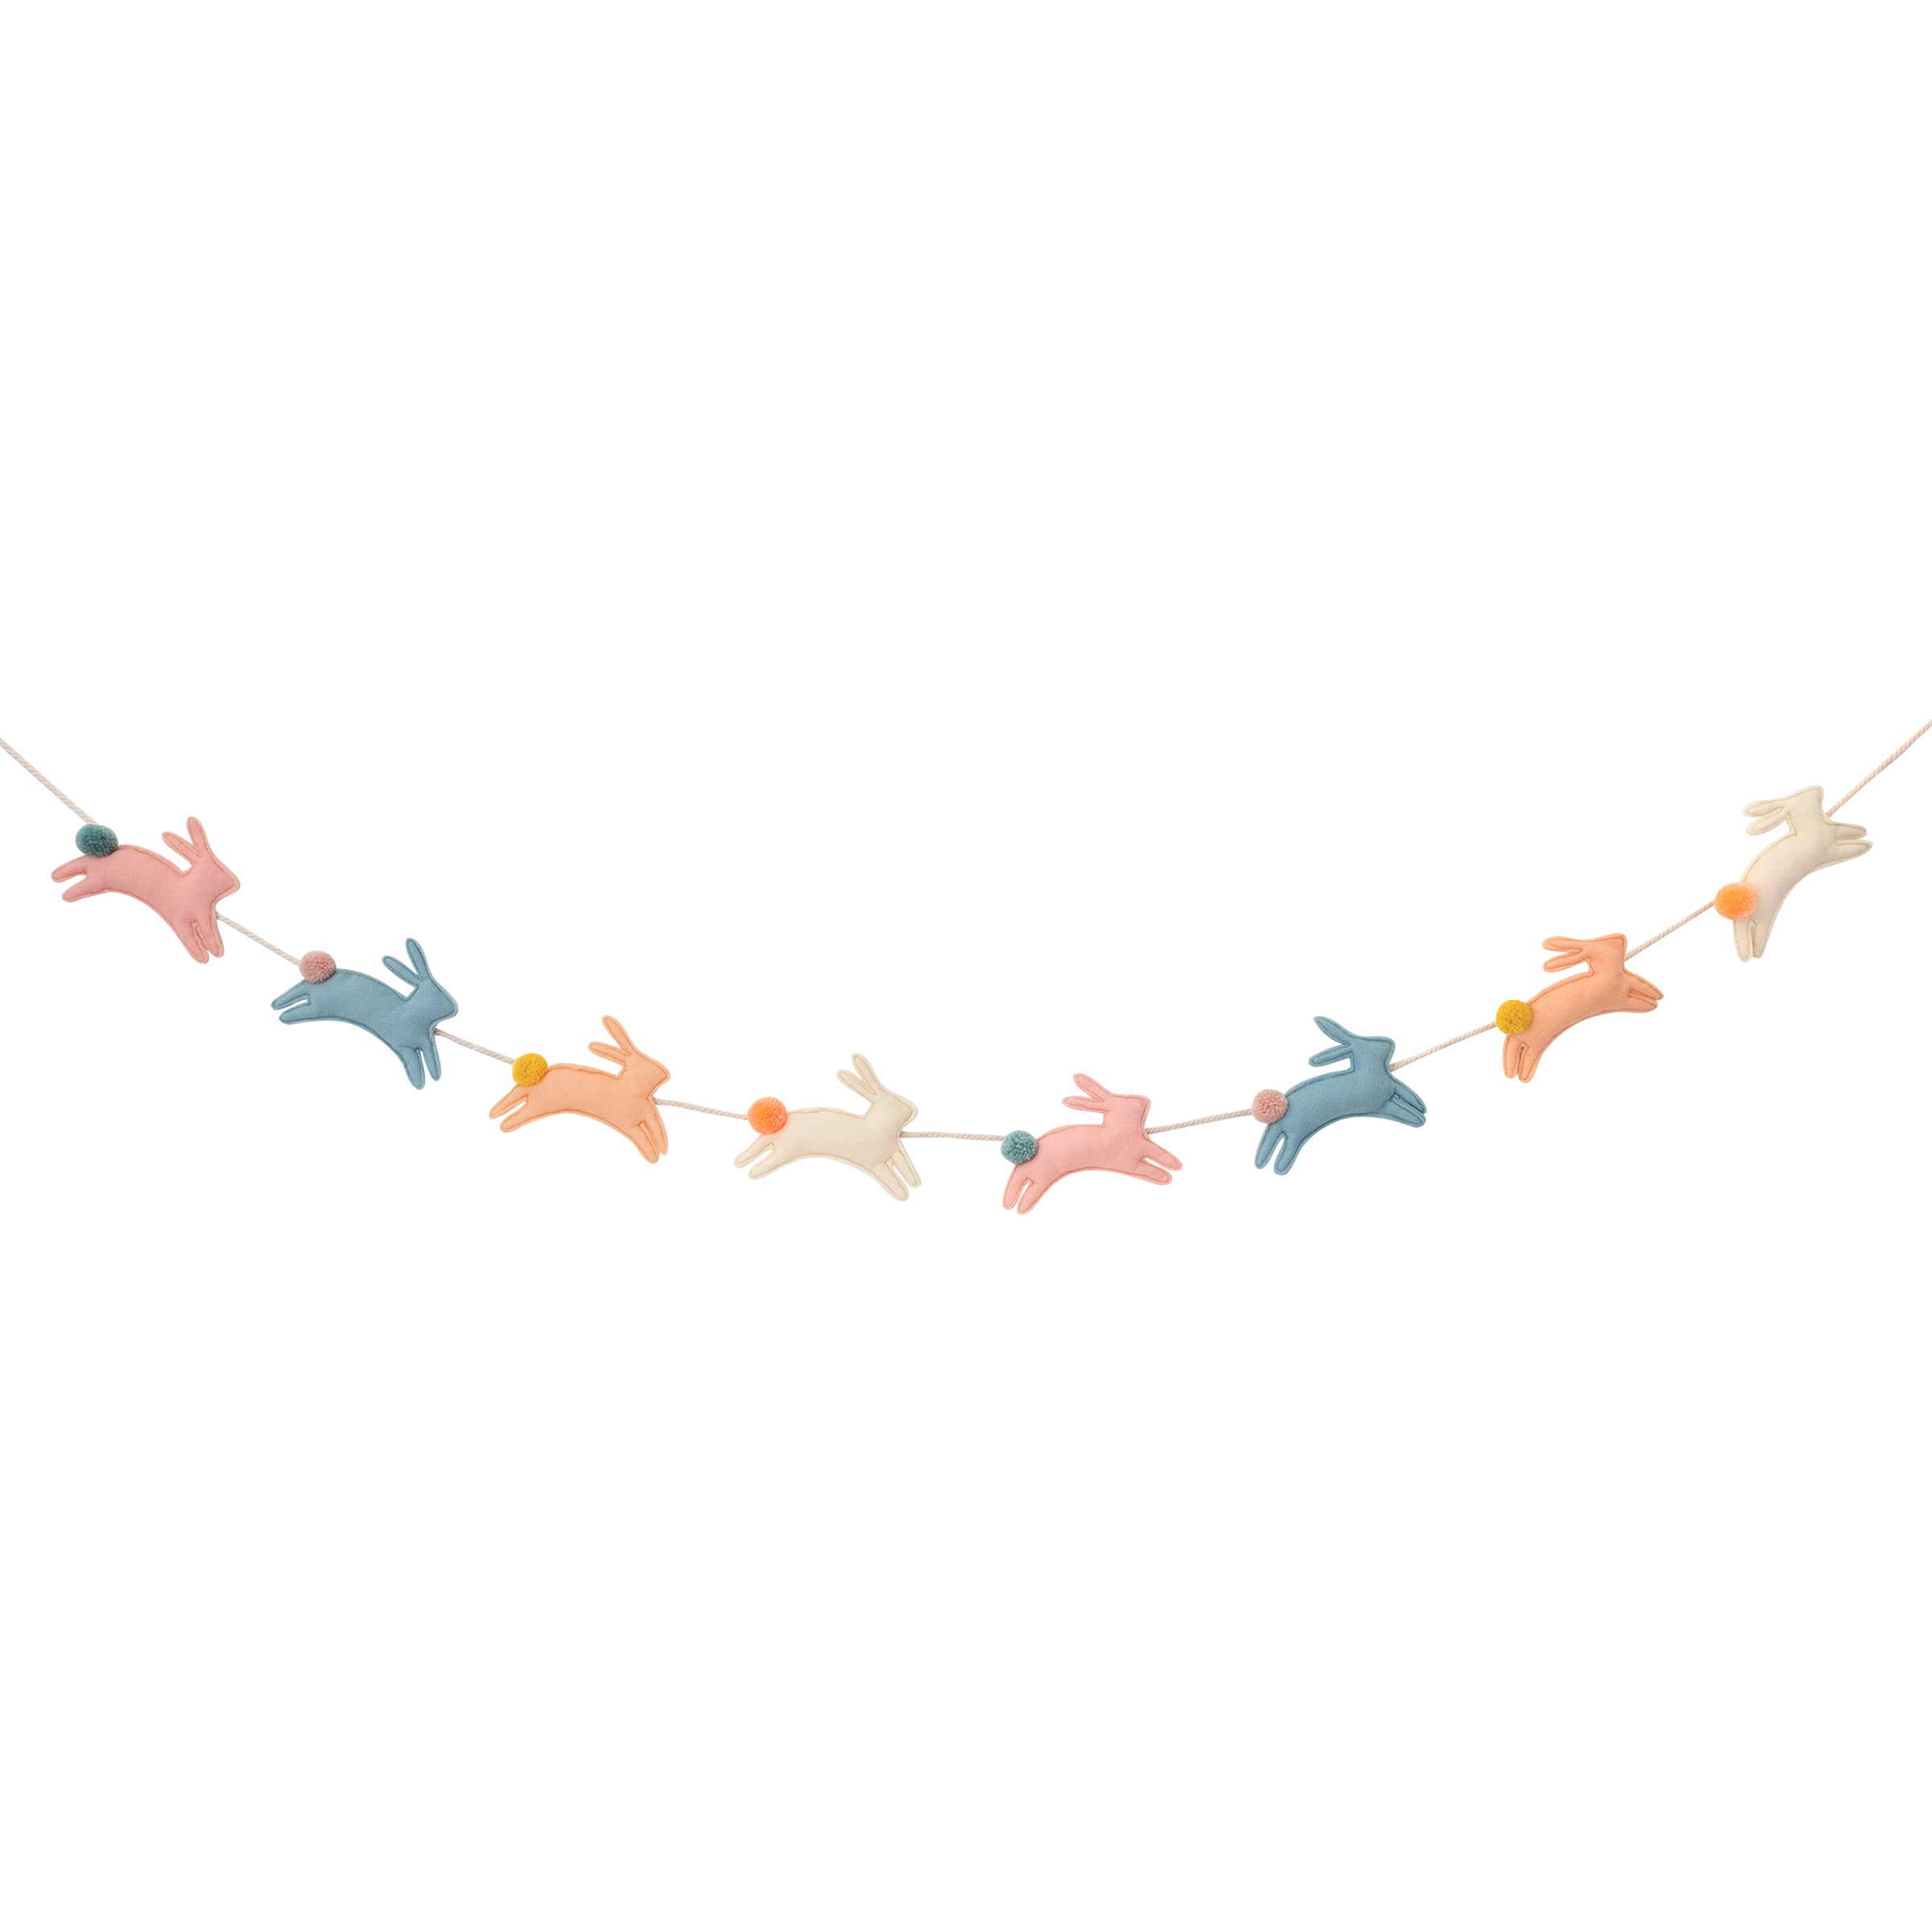 Our Easter garland, with felt bunnies, is the perfect Easter decoration.